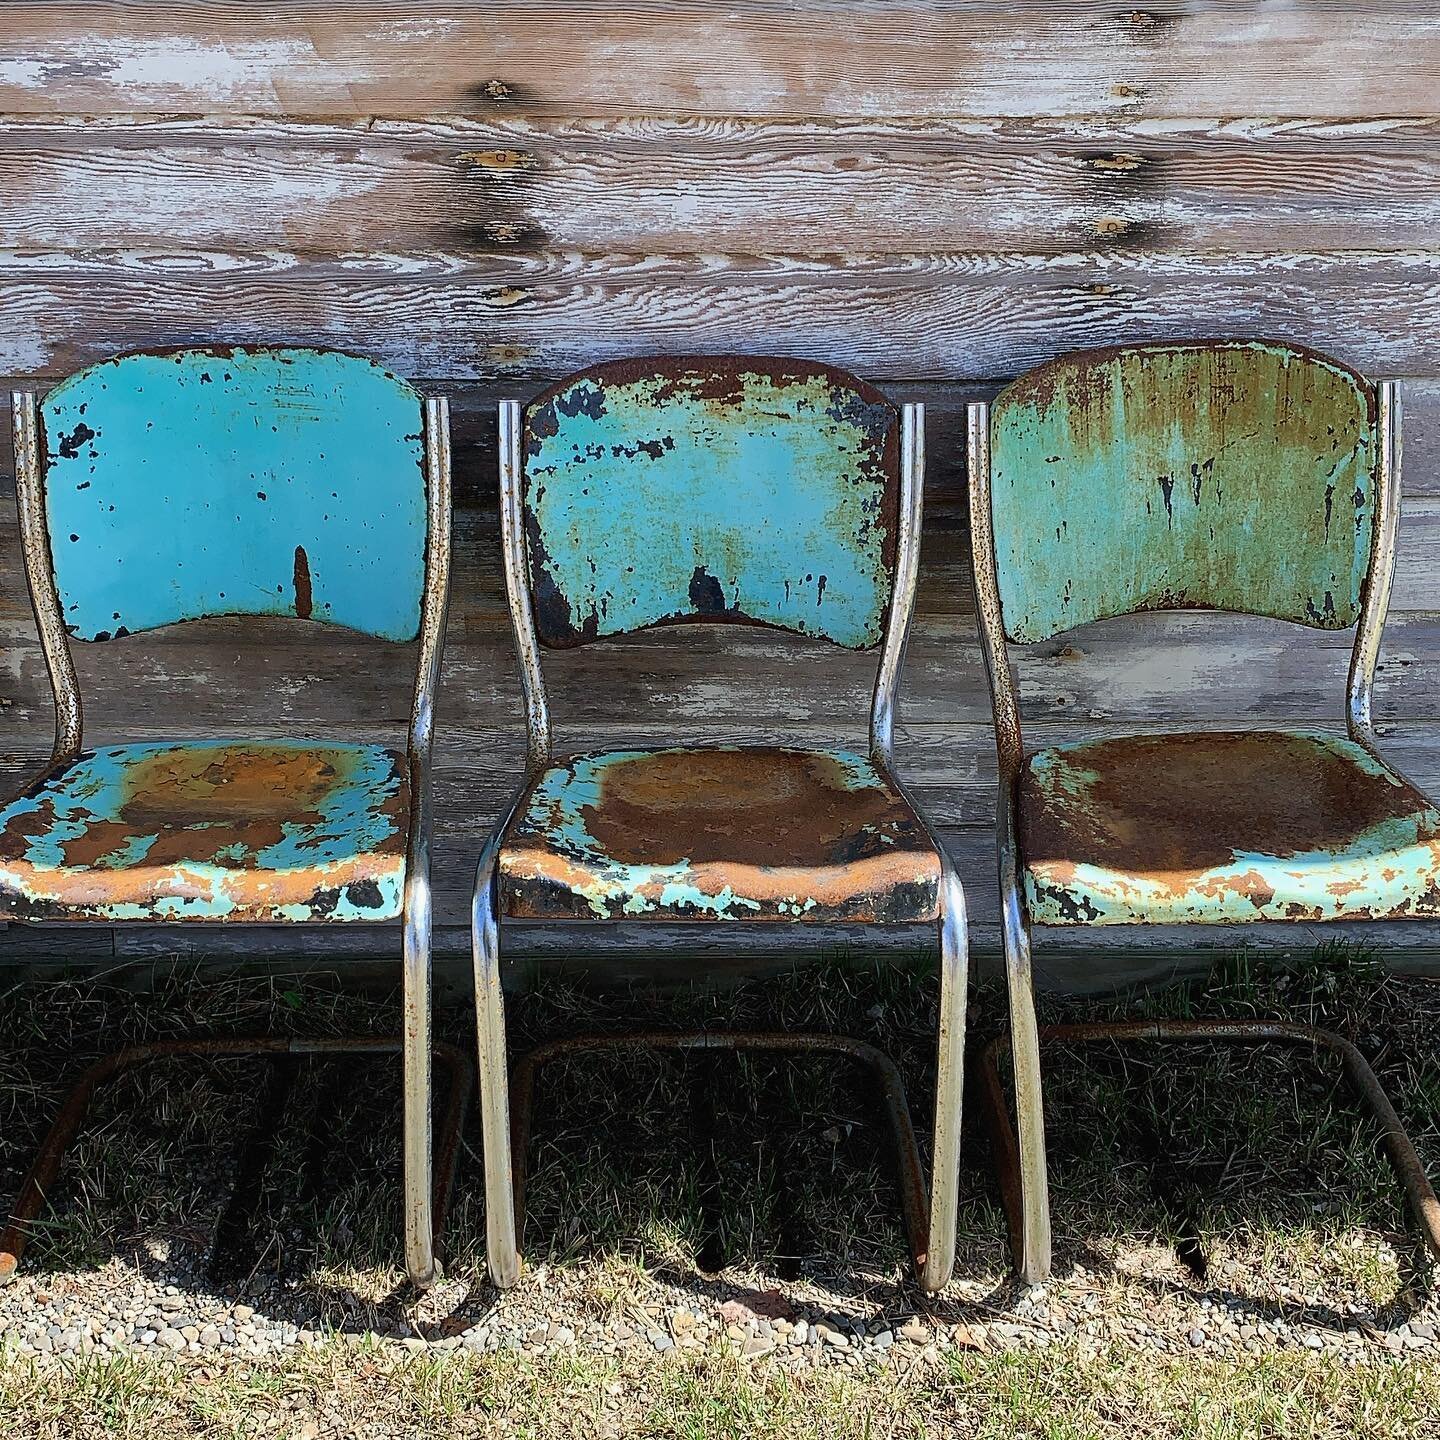 I would like these. Waiting. 

#newengland#reclaimed#repurposed#antique#vivienandcoco#camdenmaine#homedecor#madeinmaine#shoplocal#shopsmall#shopsmallbusiness